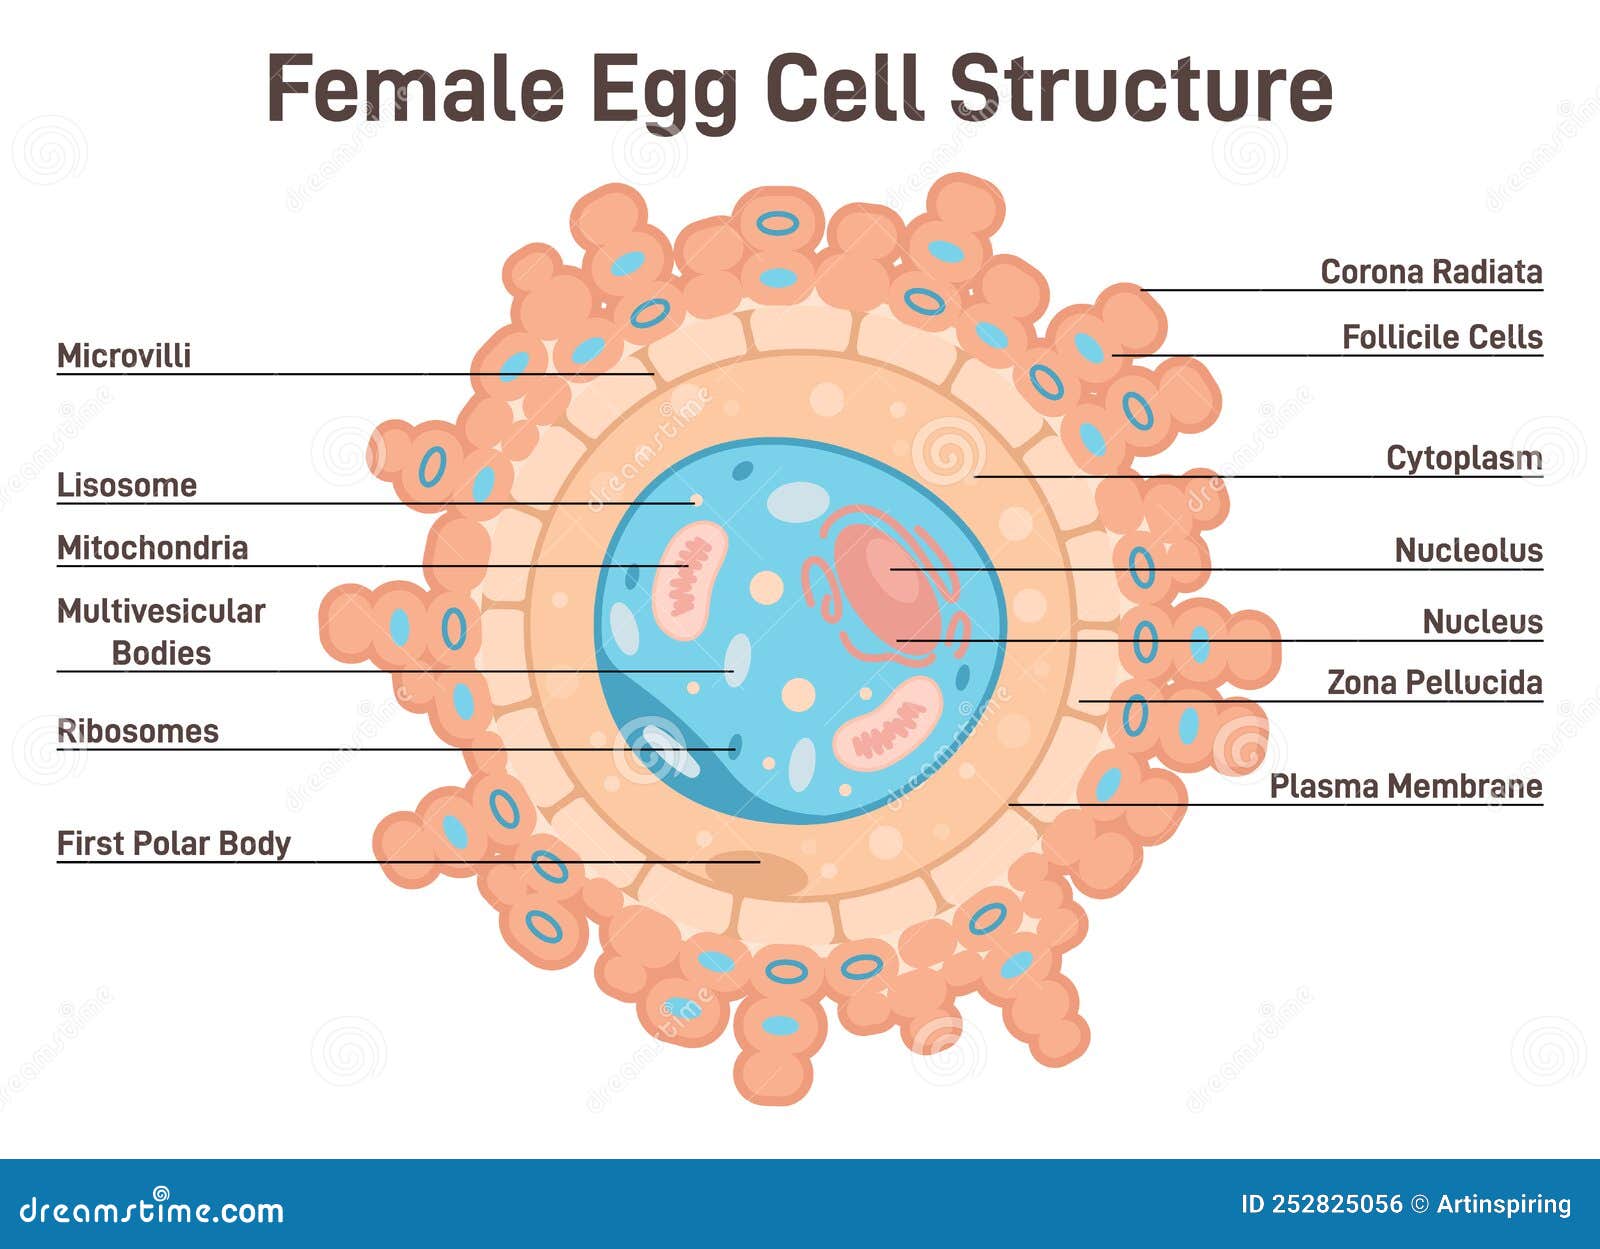 female egg cell structure. corona radiata, cytoplasm and nucleus.